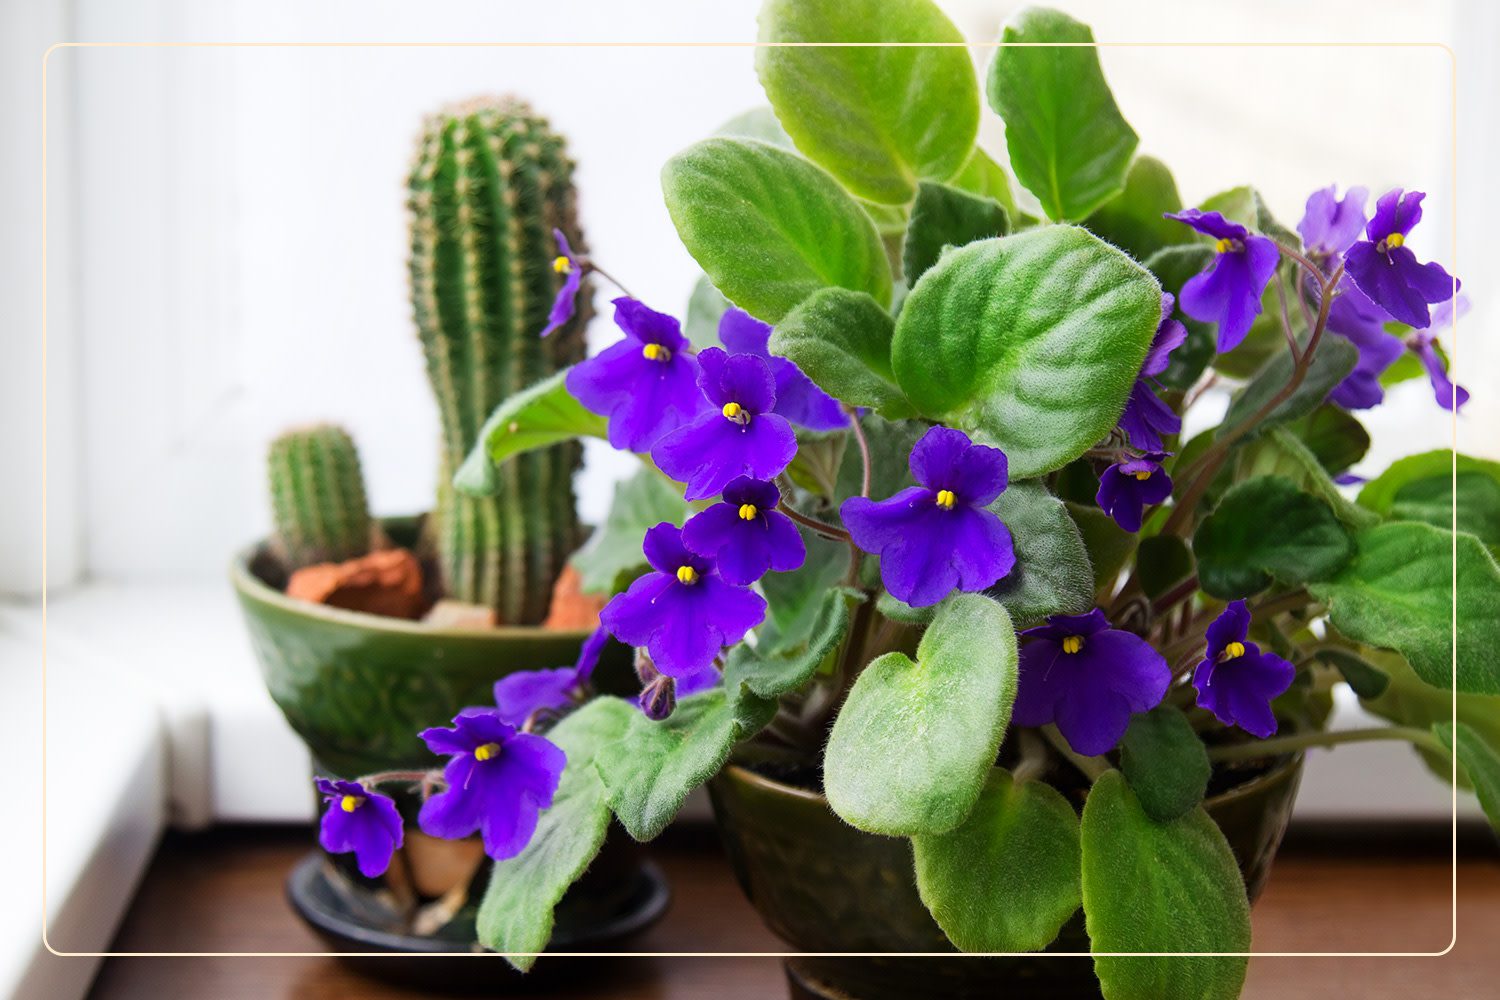 an African Violet (Saintpaulia ionantha), which is a pet-safe houseplant that flowers, grows indoors next to a cactus